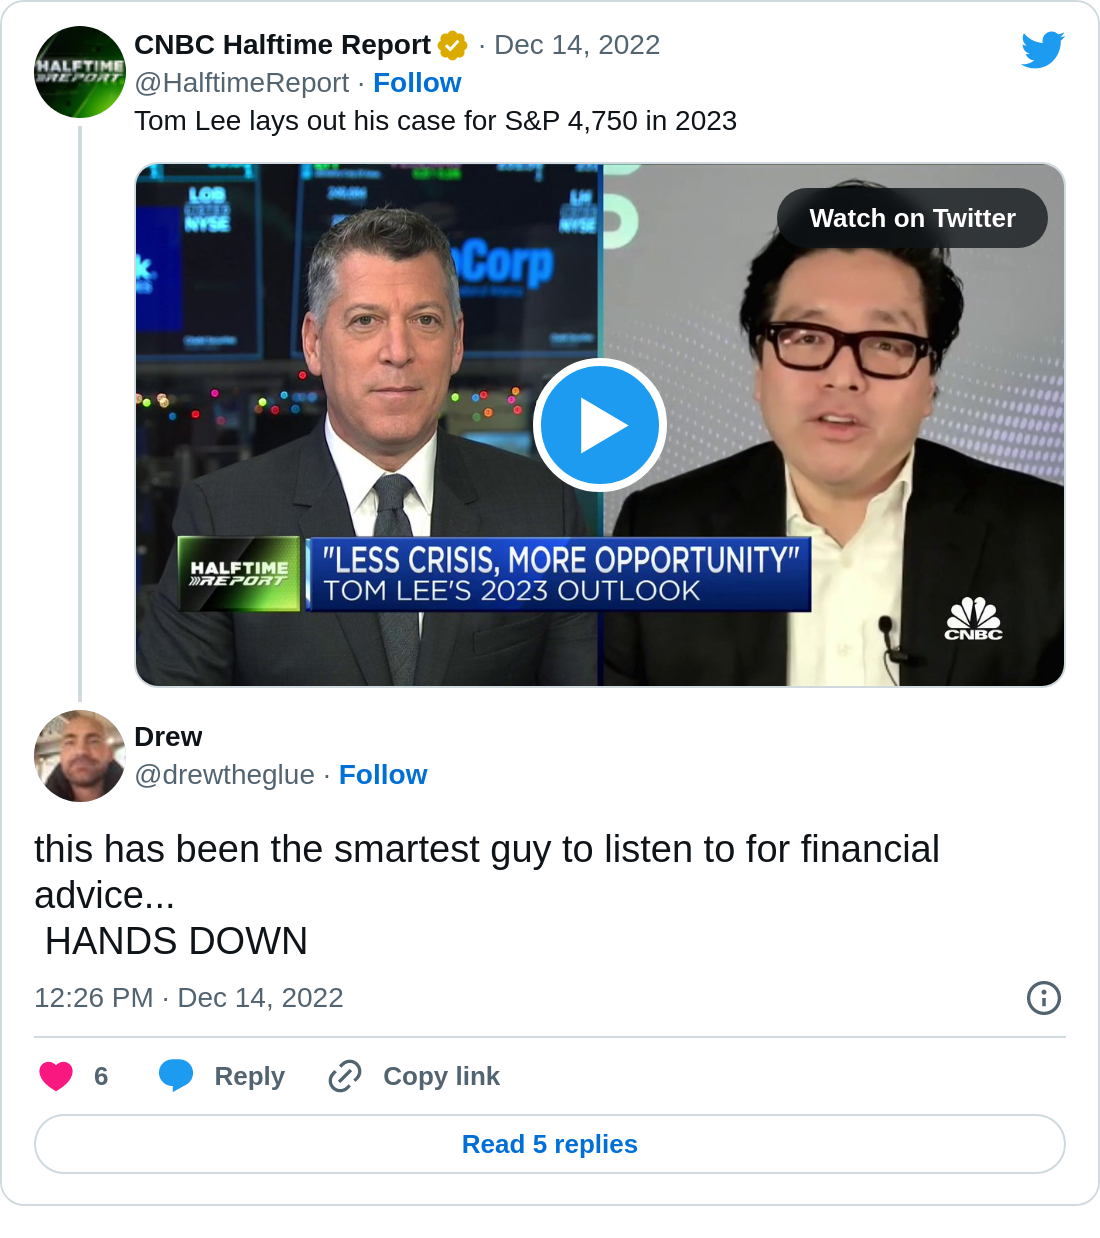 Drew: @HalftimeReport @fs_insight this has been the smartest guy to listen...